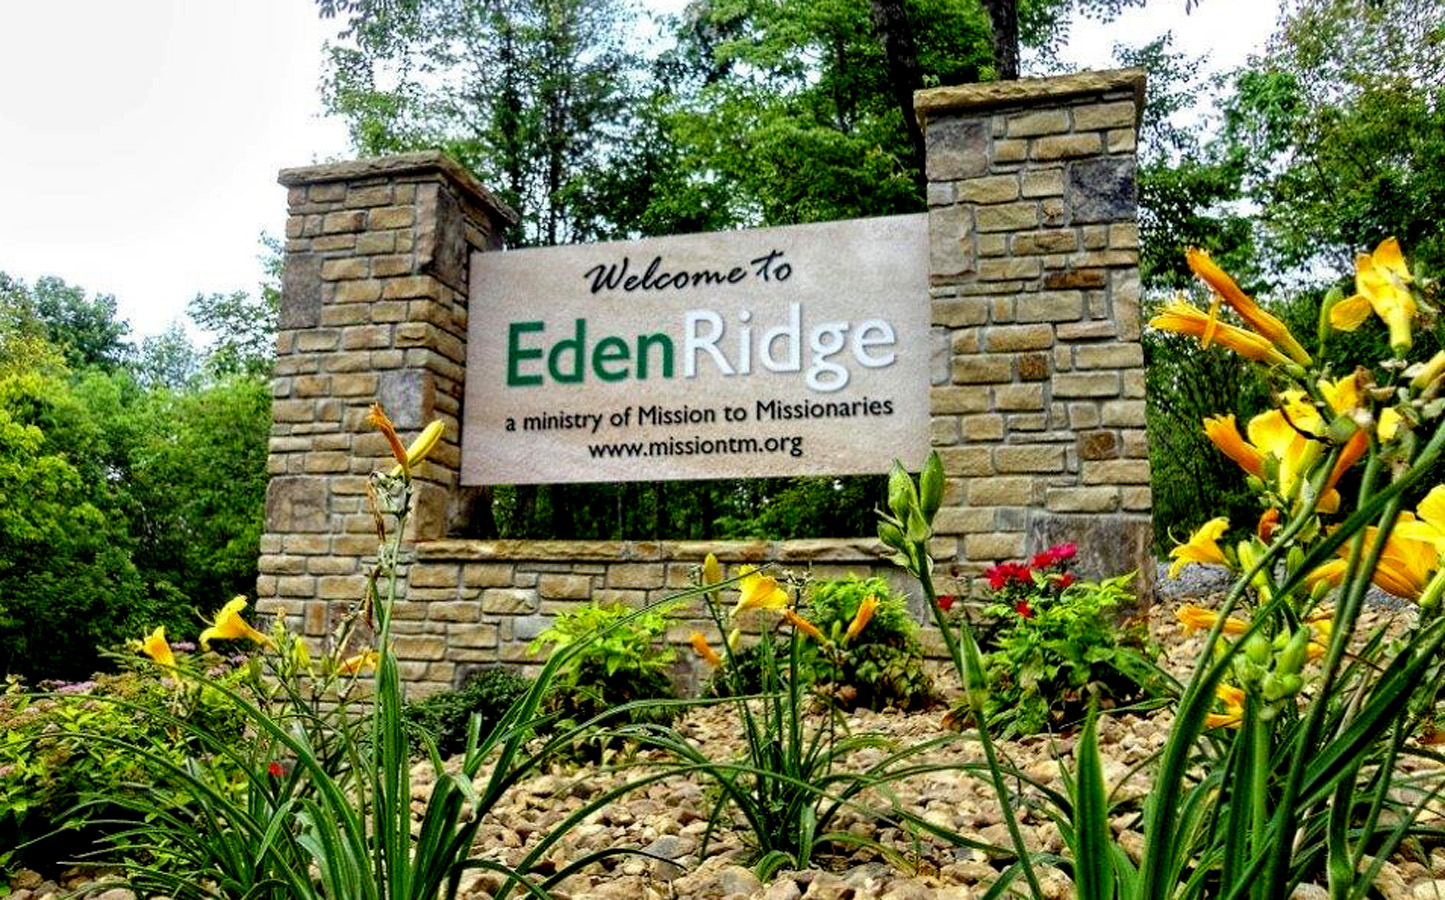 The Dossmanns now live in the U.S. where they are helping at Eden Ridge, a missionary retreat center founded by their son,  Oliver, near Crossville, Tenn. They also continue to help Reach Beyond with French radio programming and communications.